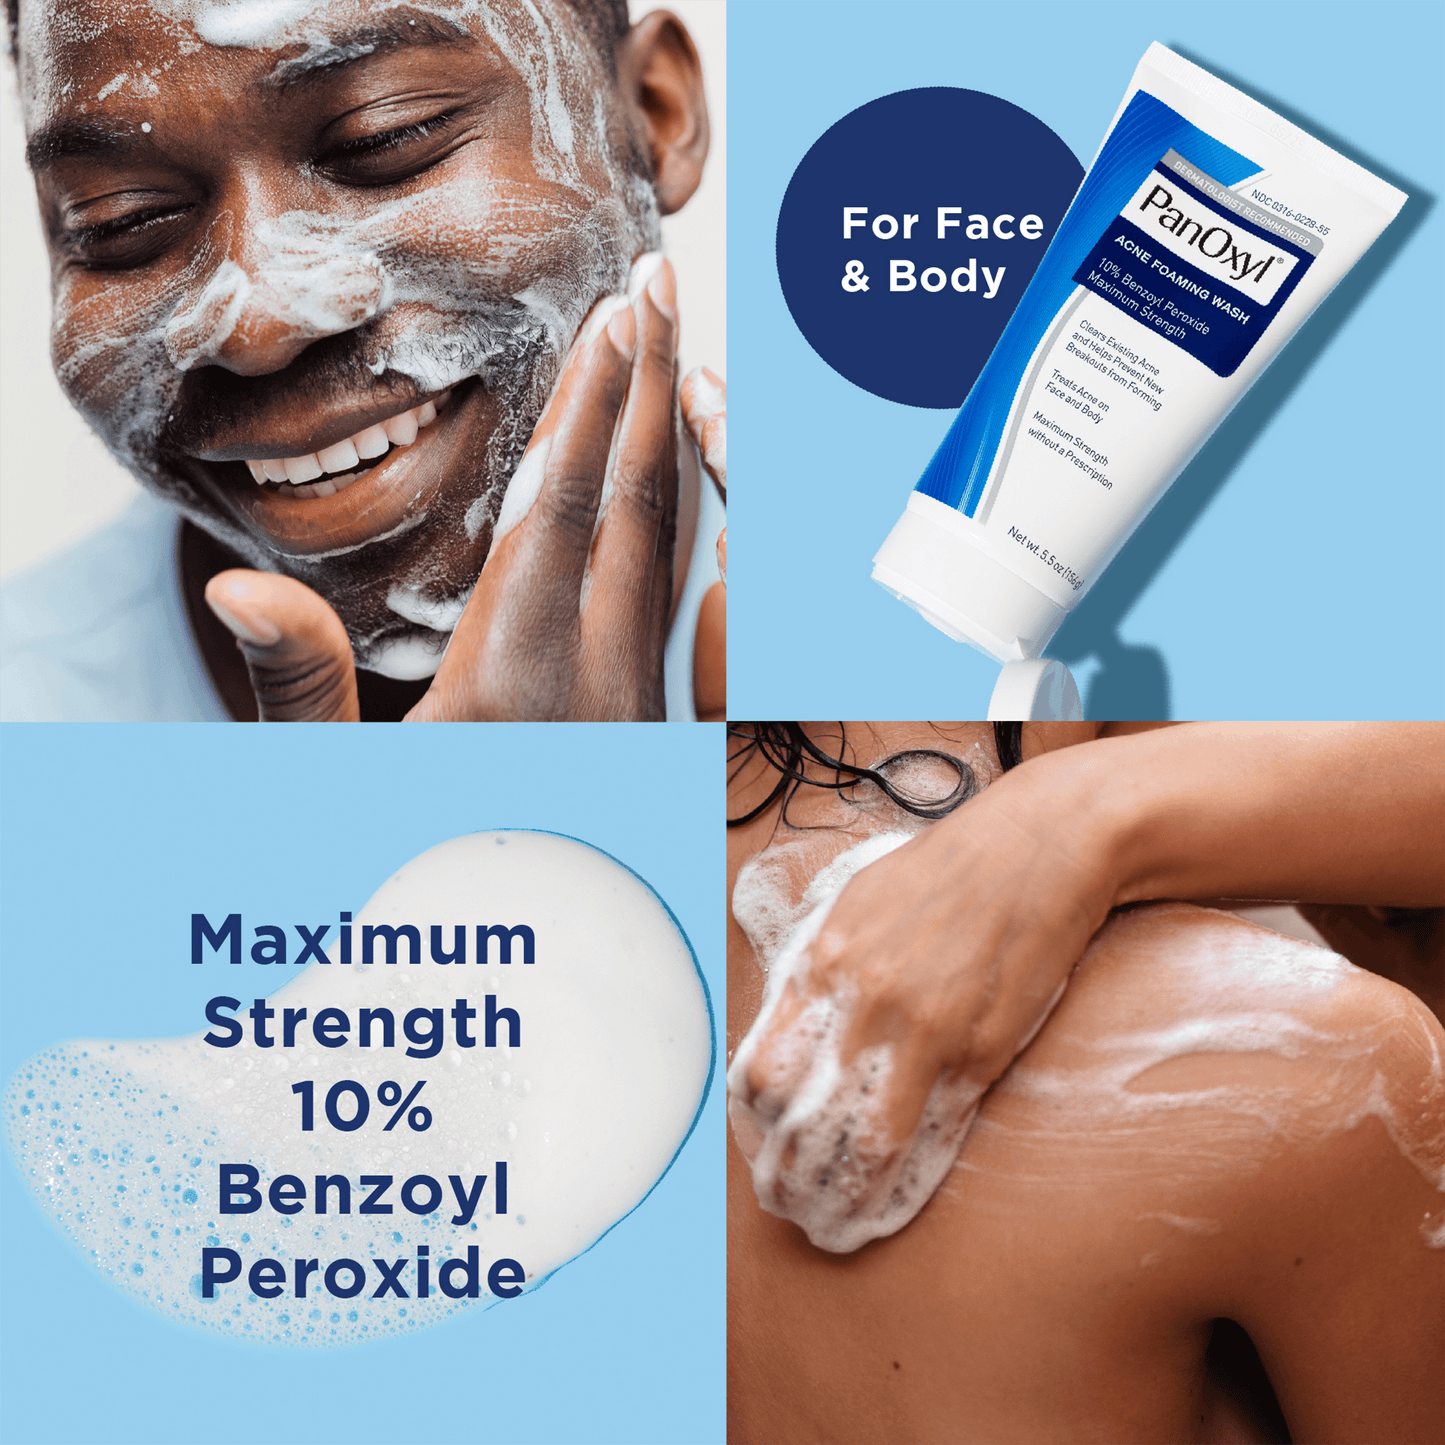 PanOxyl ®️ Acne Foaming Wash 10% Benzoyl Peroxide Maximum Strength • Acne Foaming Wash Against Acne & Further Outbreak Of Acne • 1x156gr